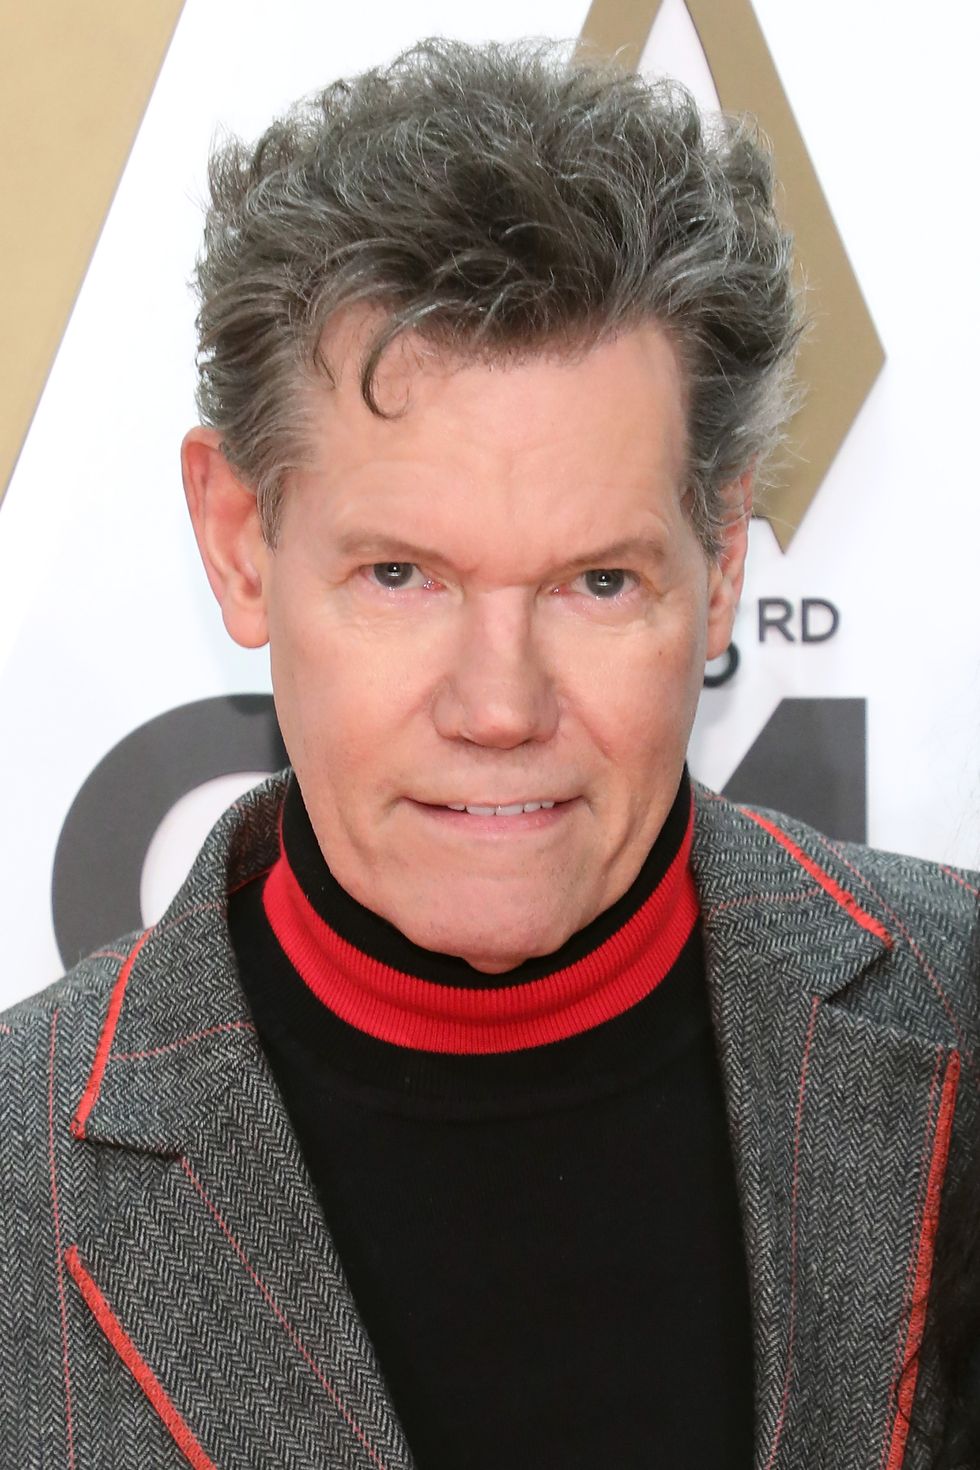 randy travis wearing a black red and gray suit and smiling on an award show red carpet